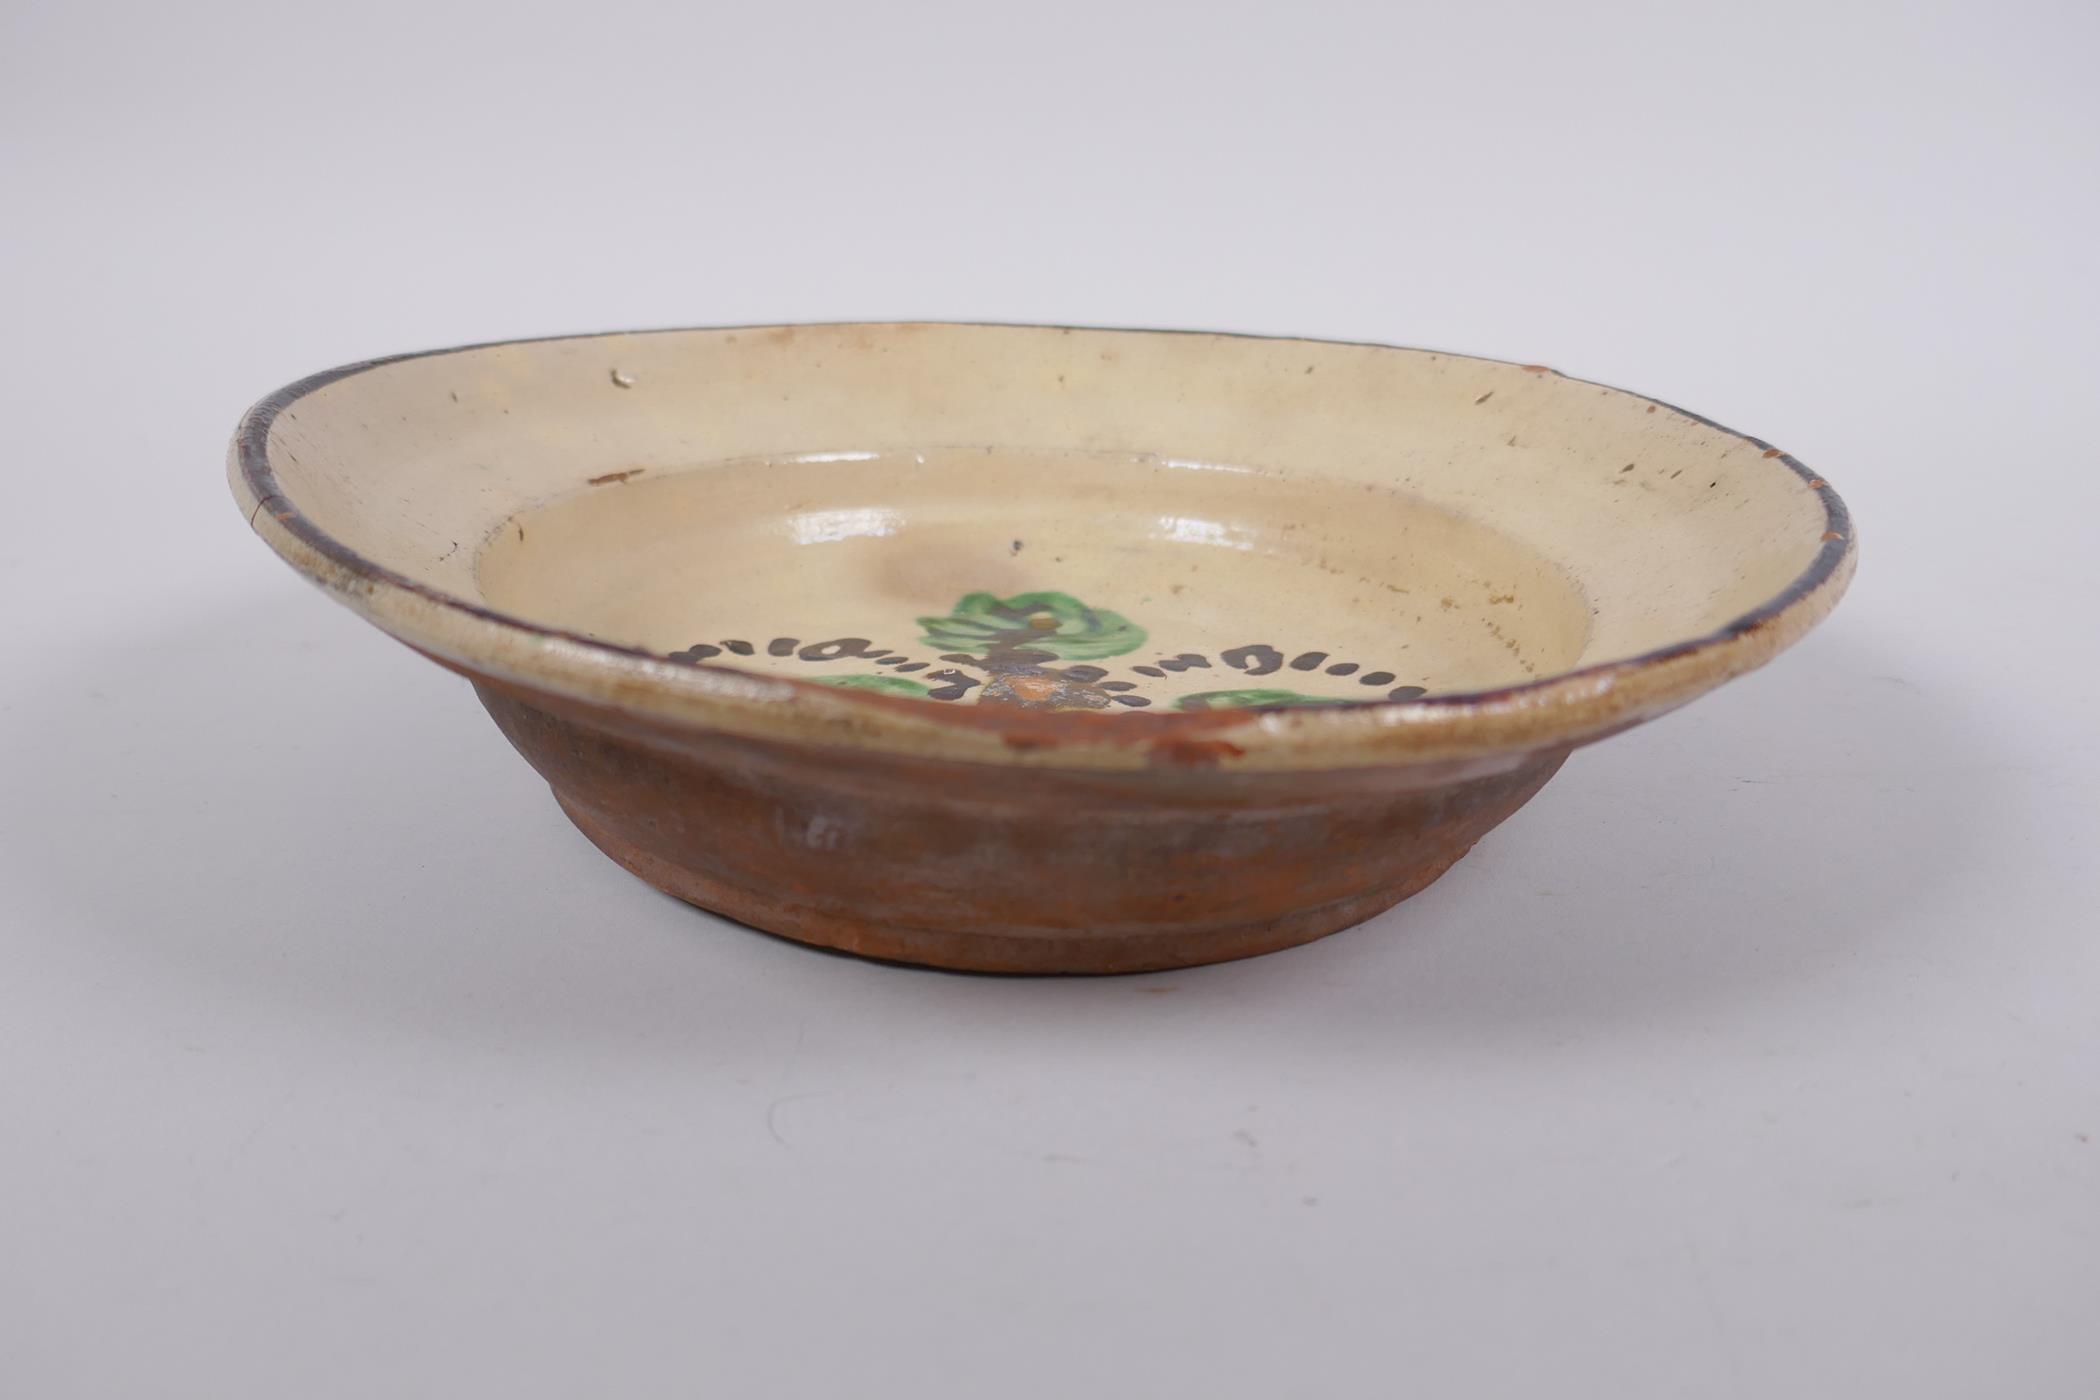 An antique Spanish terracotta dish with a faience glaze and floral decoration, AF repair, 21cm - Image 2 of 6